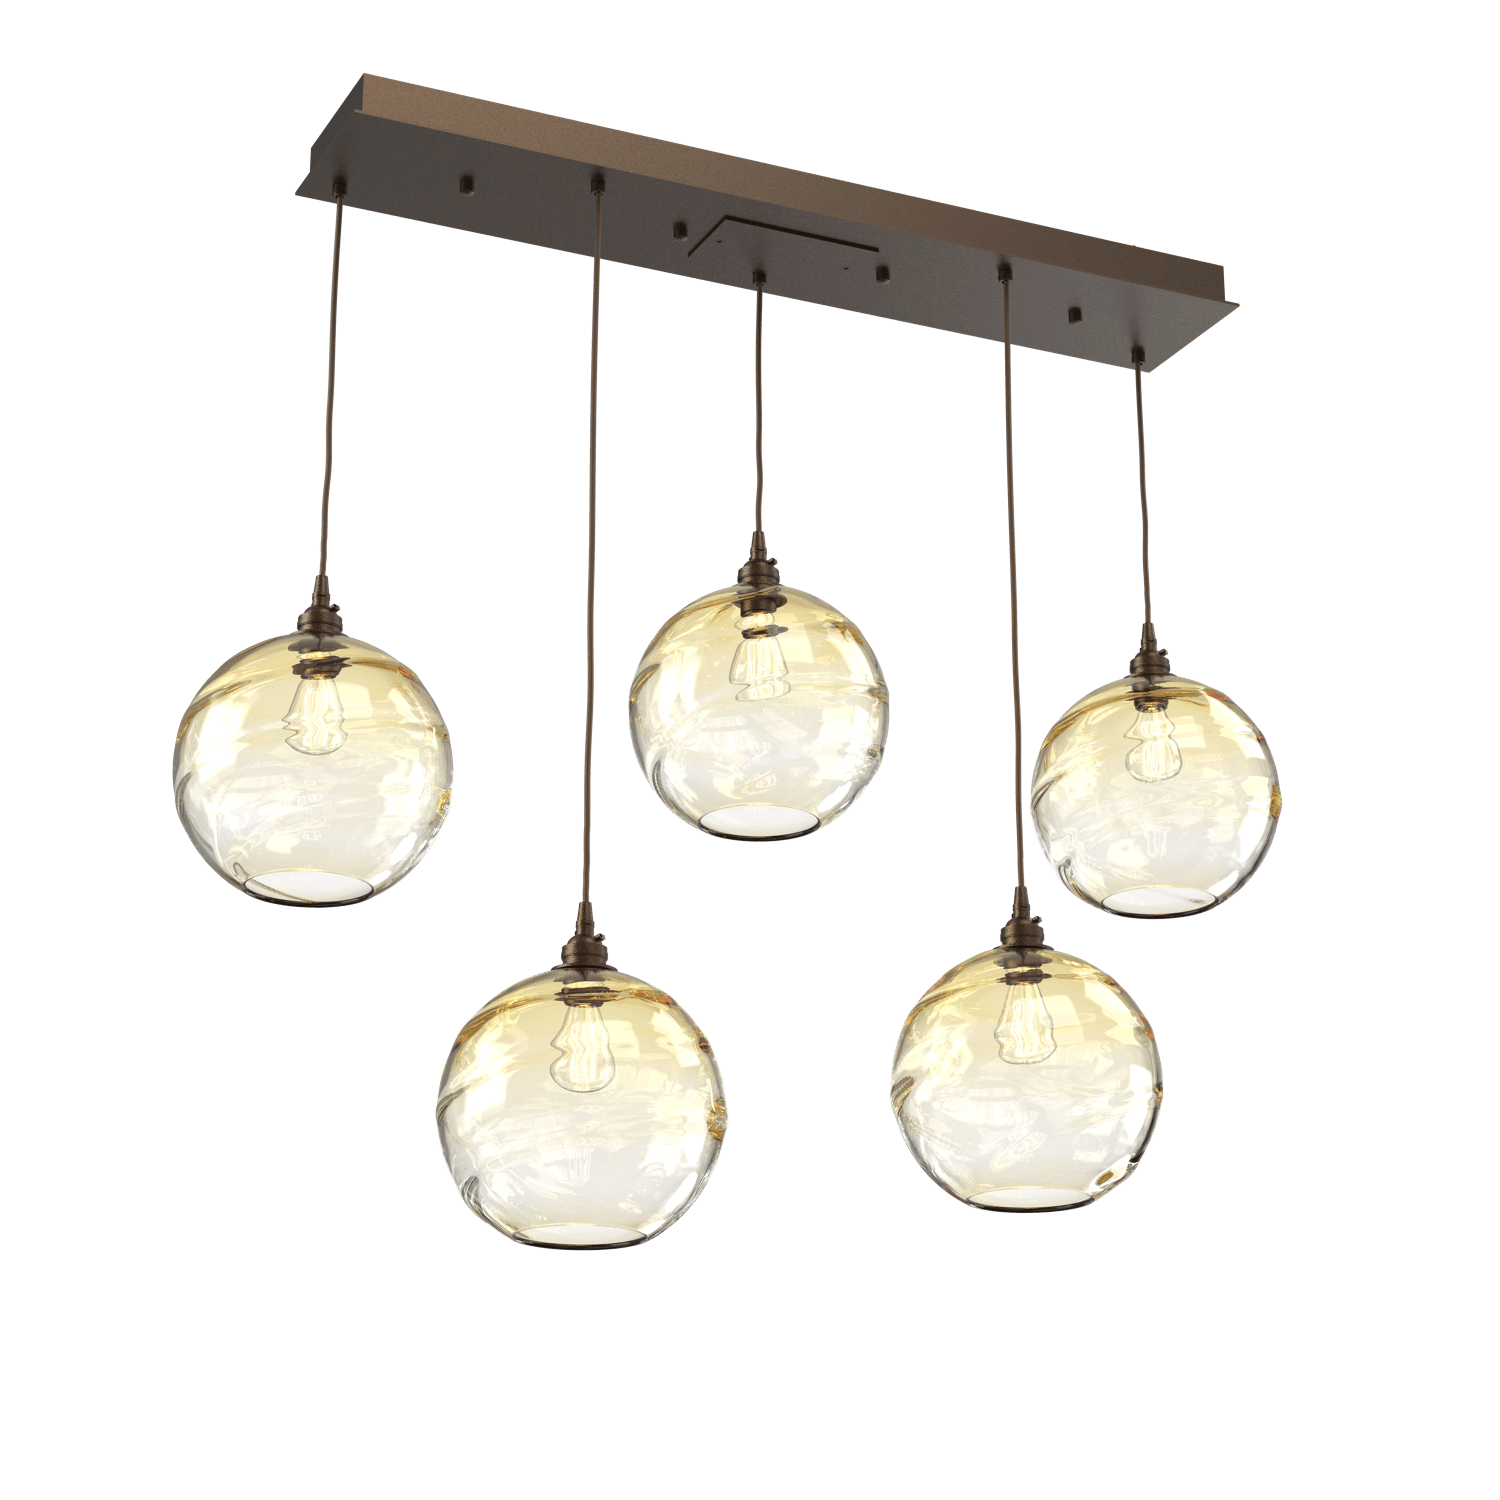 PLB0047-05-FB-OA-Hammerton-Studio-Optic-Blown-Glass-Terra-5-light-linear-pendant-chandelier-with-flat-bronze-finish-and-optic-amber-blown-glass-shades-and-incandescent-lamping